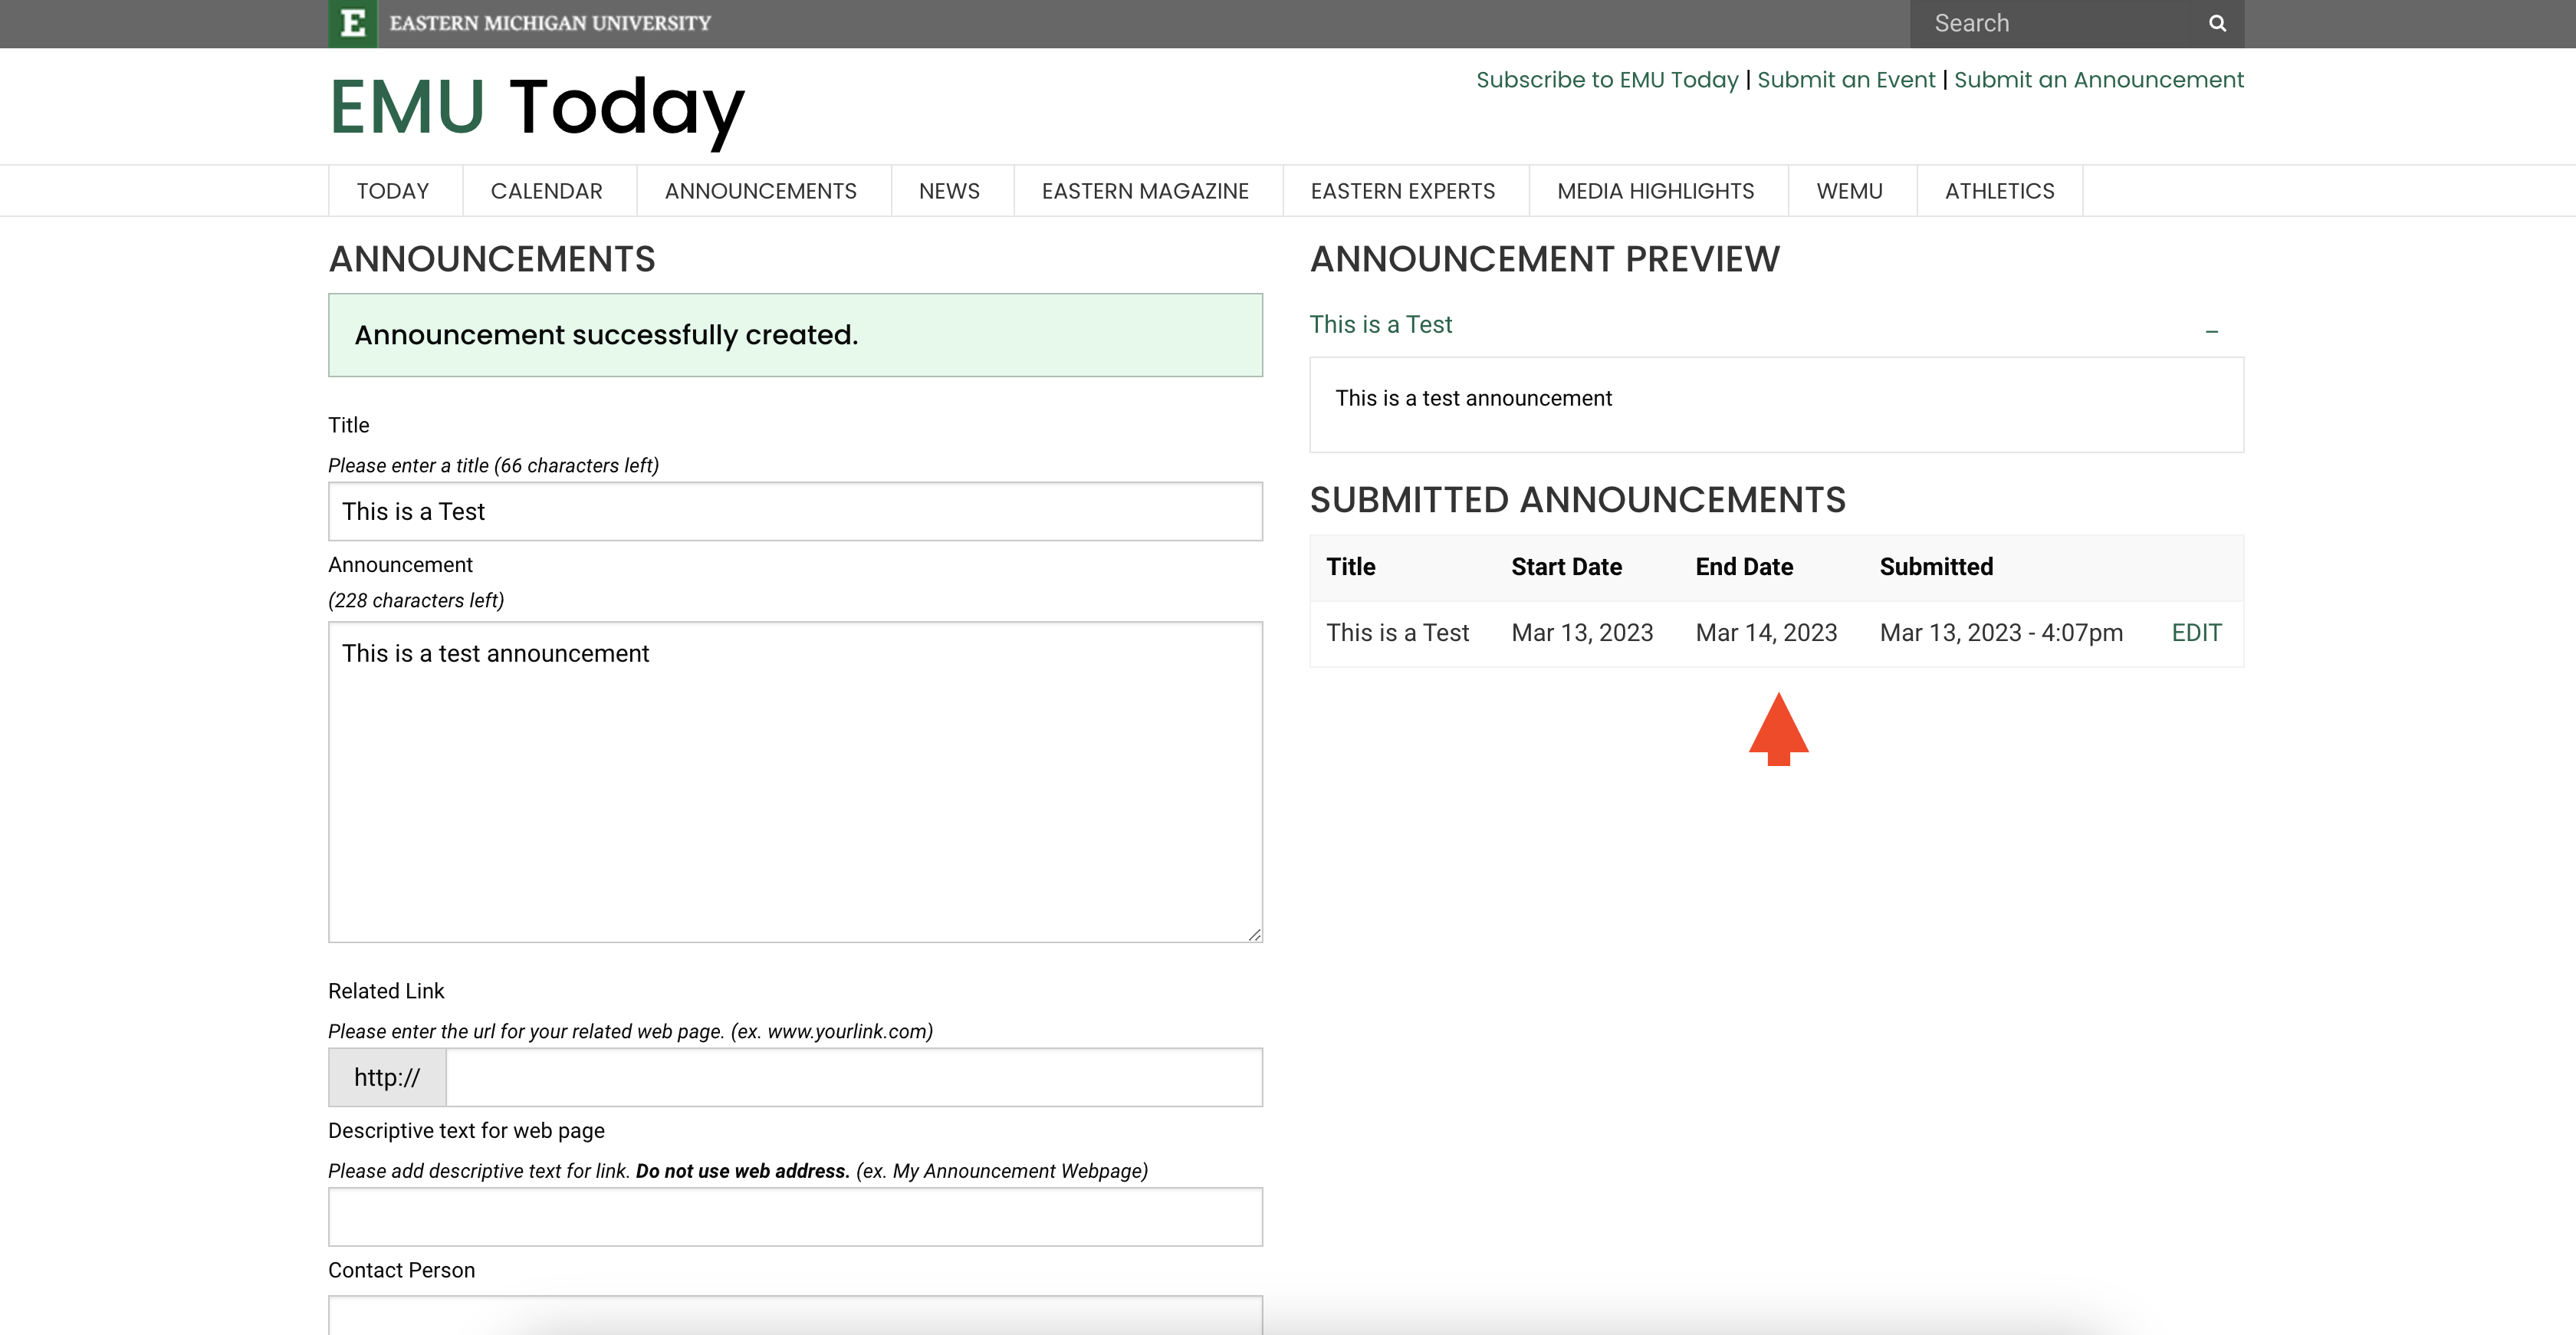 A screenshot showing a submitted announcement